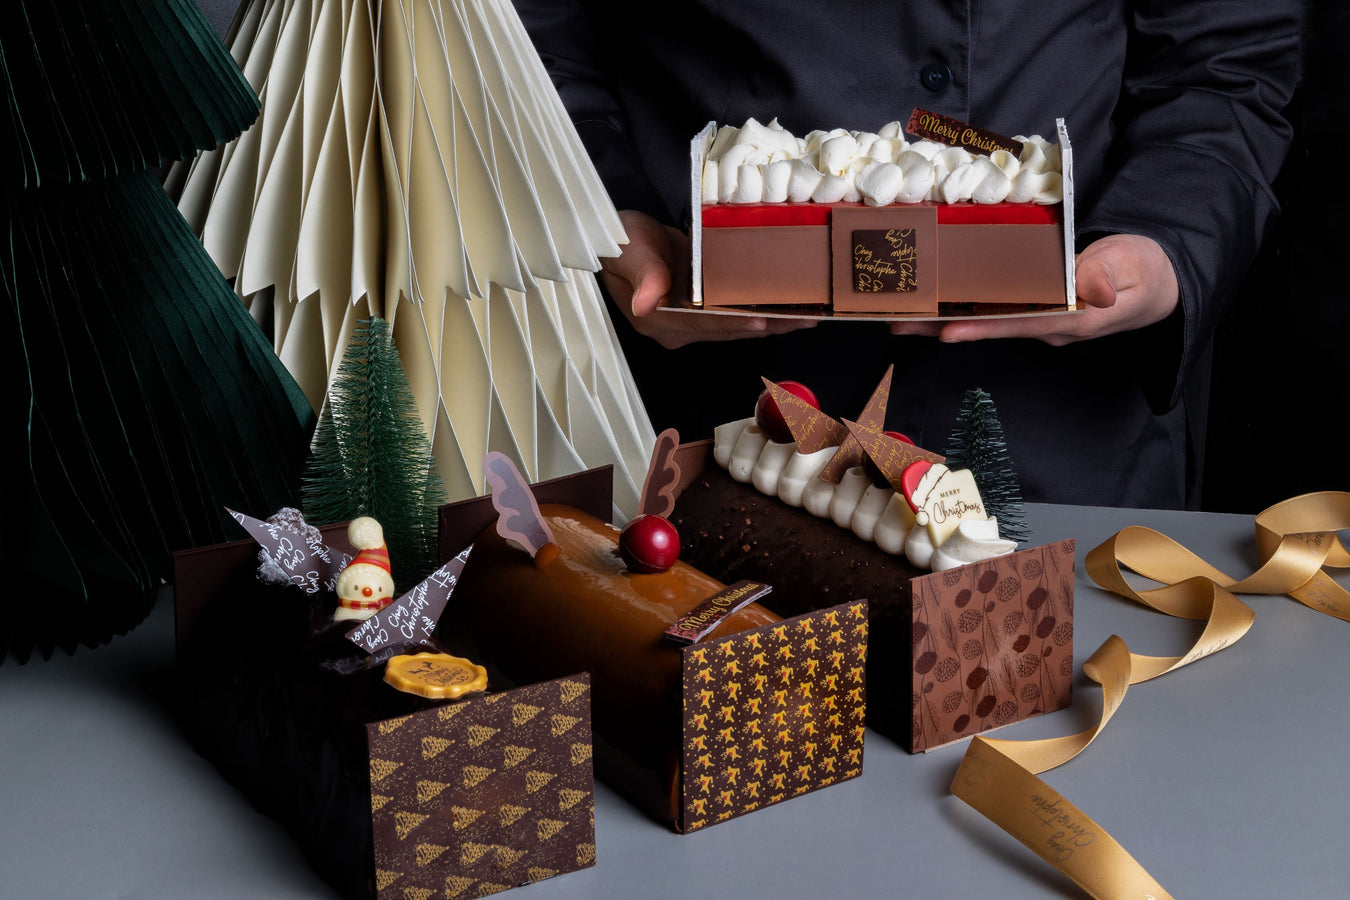 Best Christmas desserts in Burnaby and White Rock, near Vancouver, BC, Buche de Noel / Yule Log Christmas Dessert Cakes by Chez Christophe Cake Shop